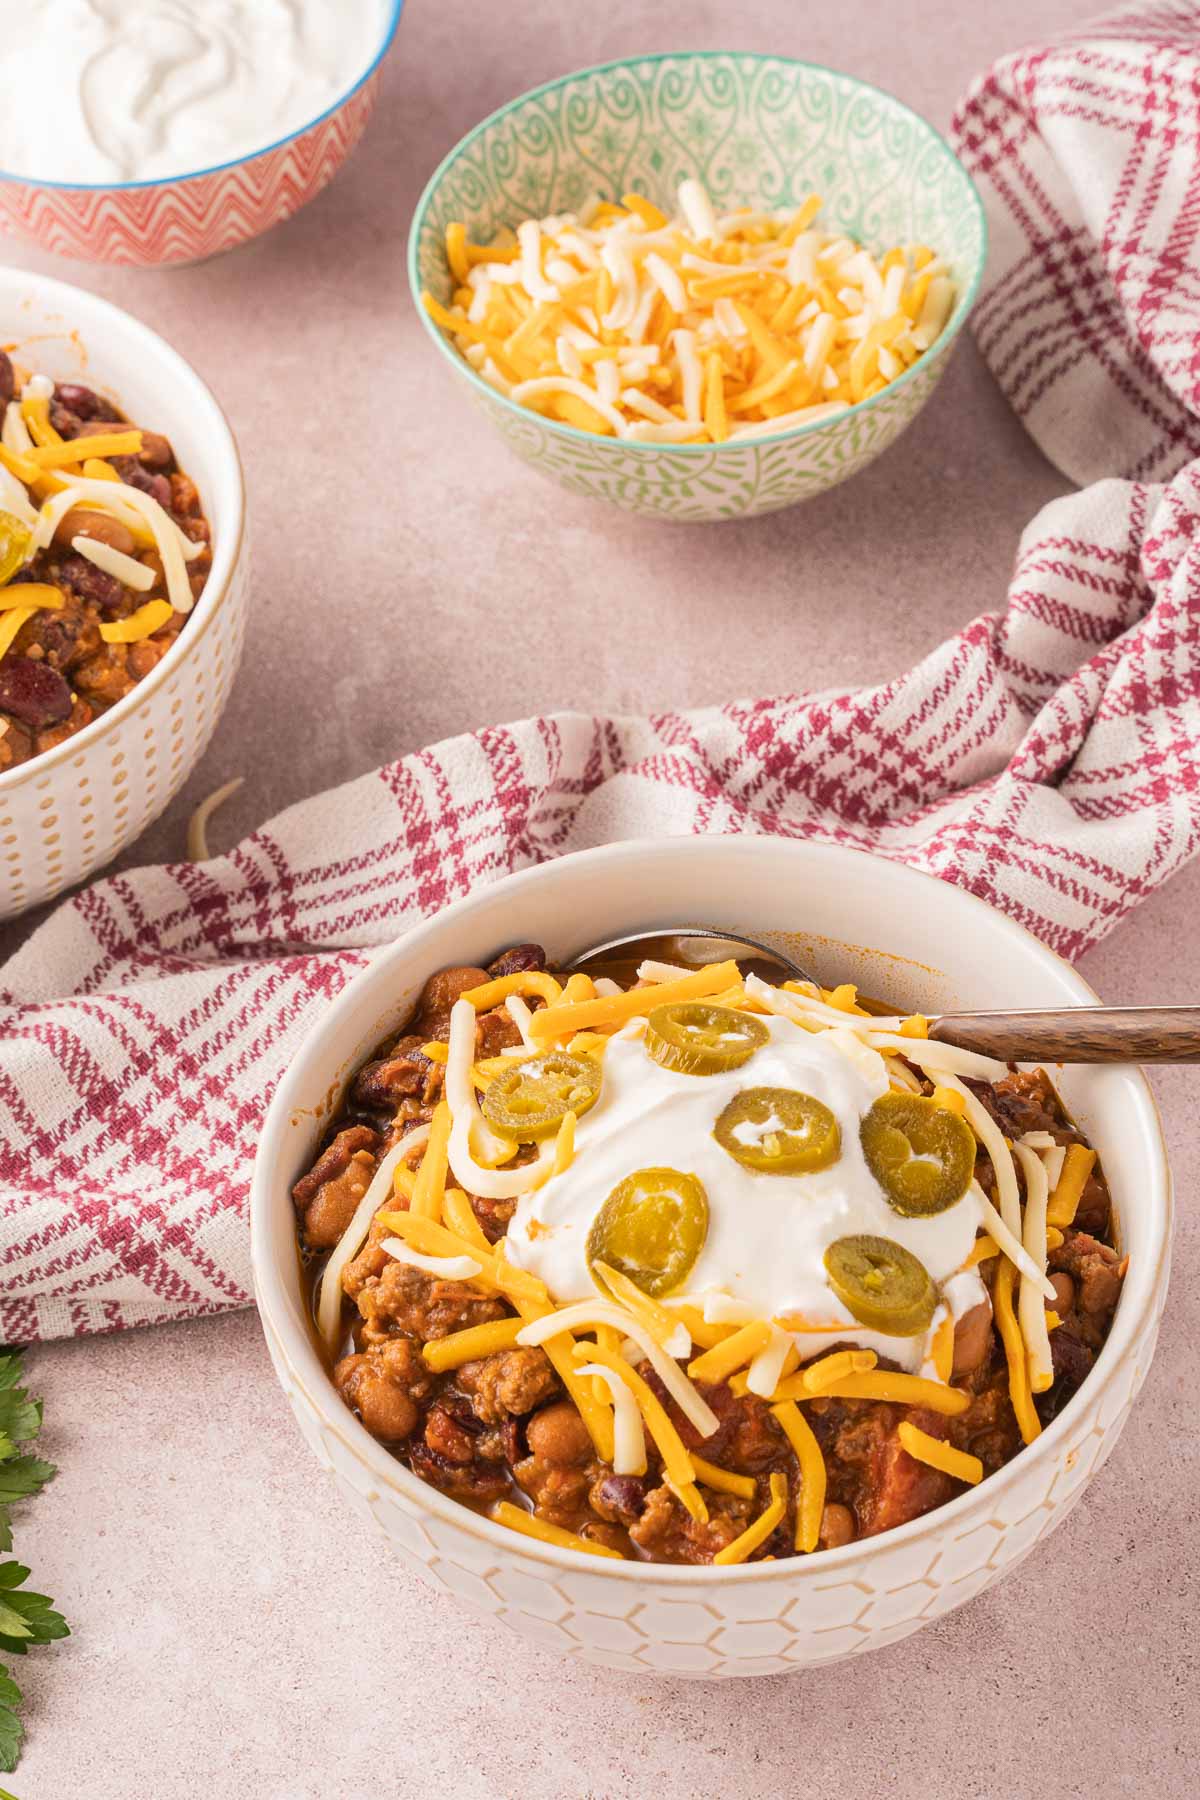 Dutch oven chili in white bowls, shredded cheese, sour cream.